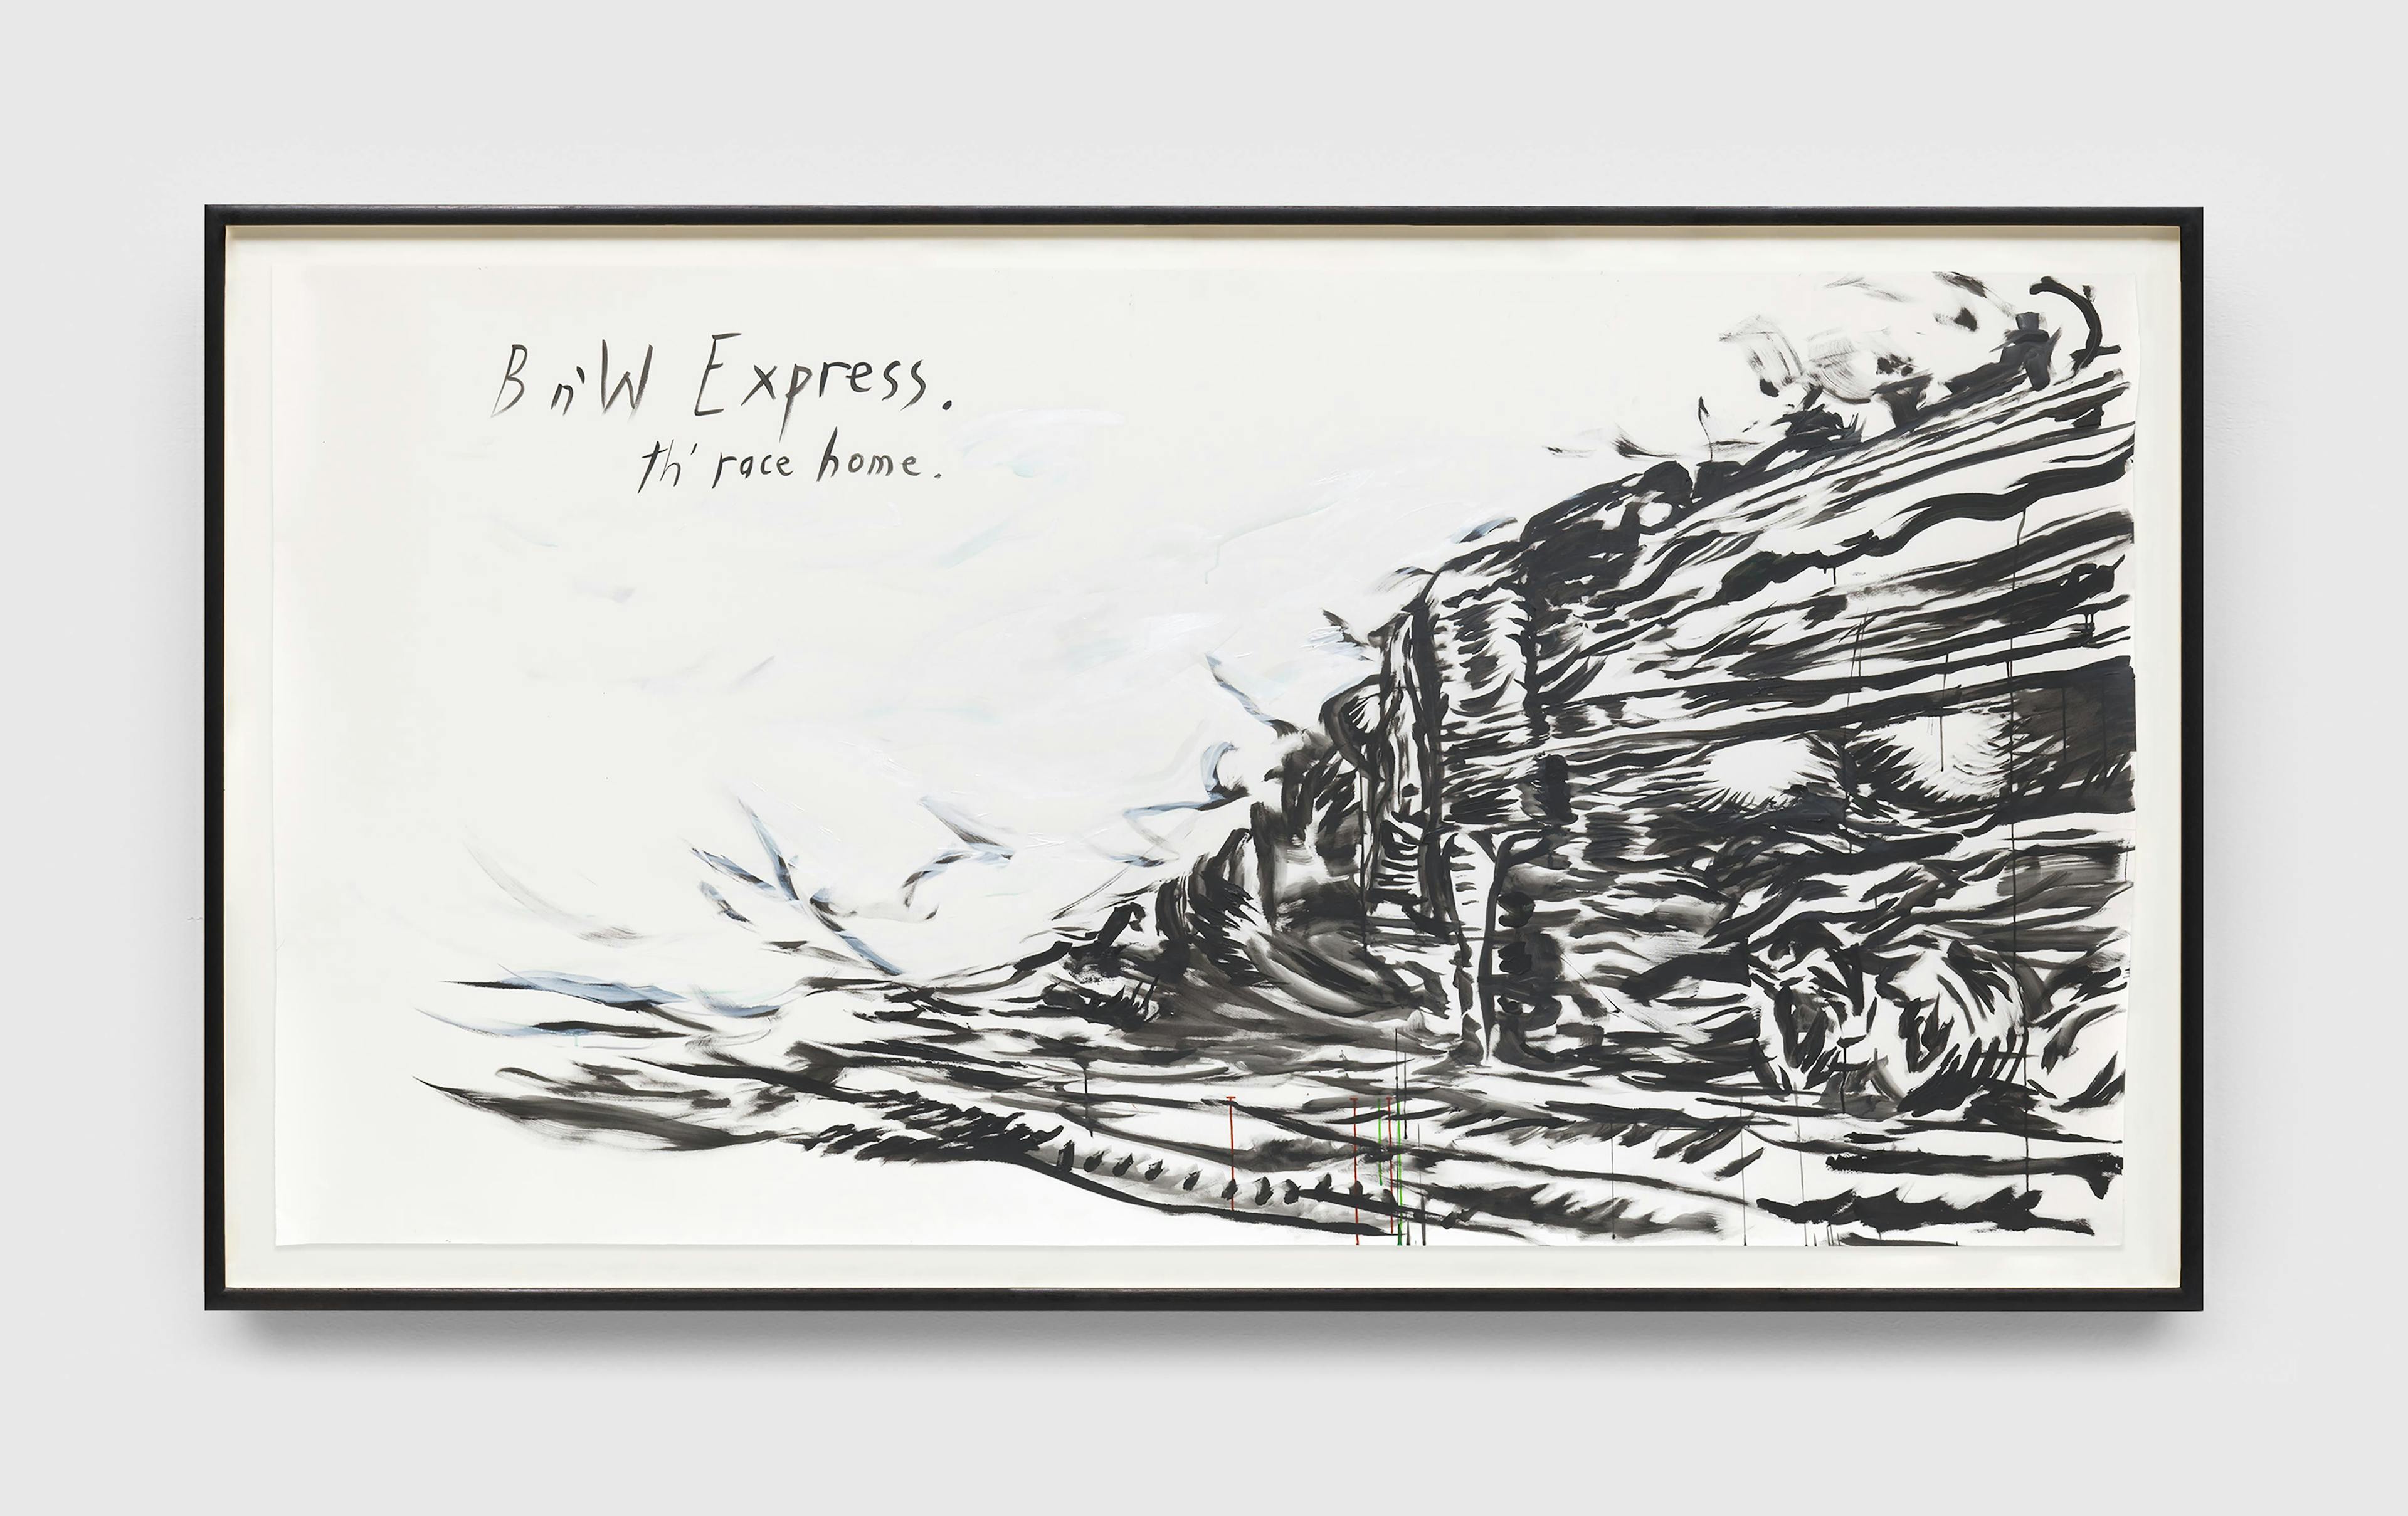 A work on paper by Raymond Pettibon, titled No Title (Bn'W Express. Th' ...), dated 2020.